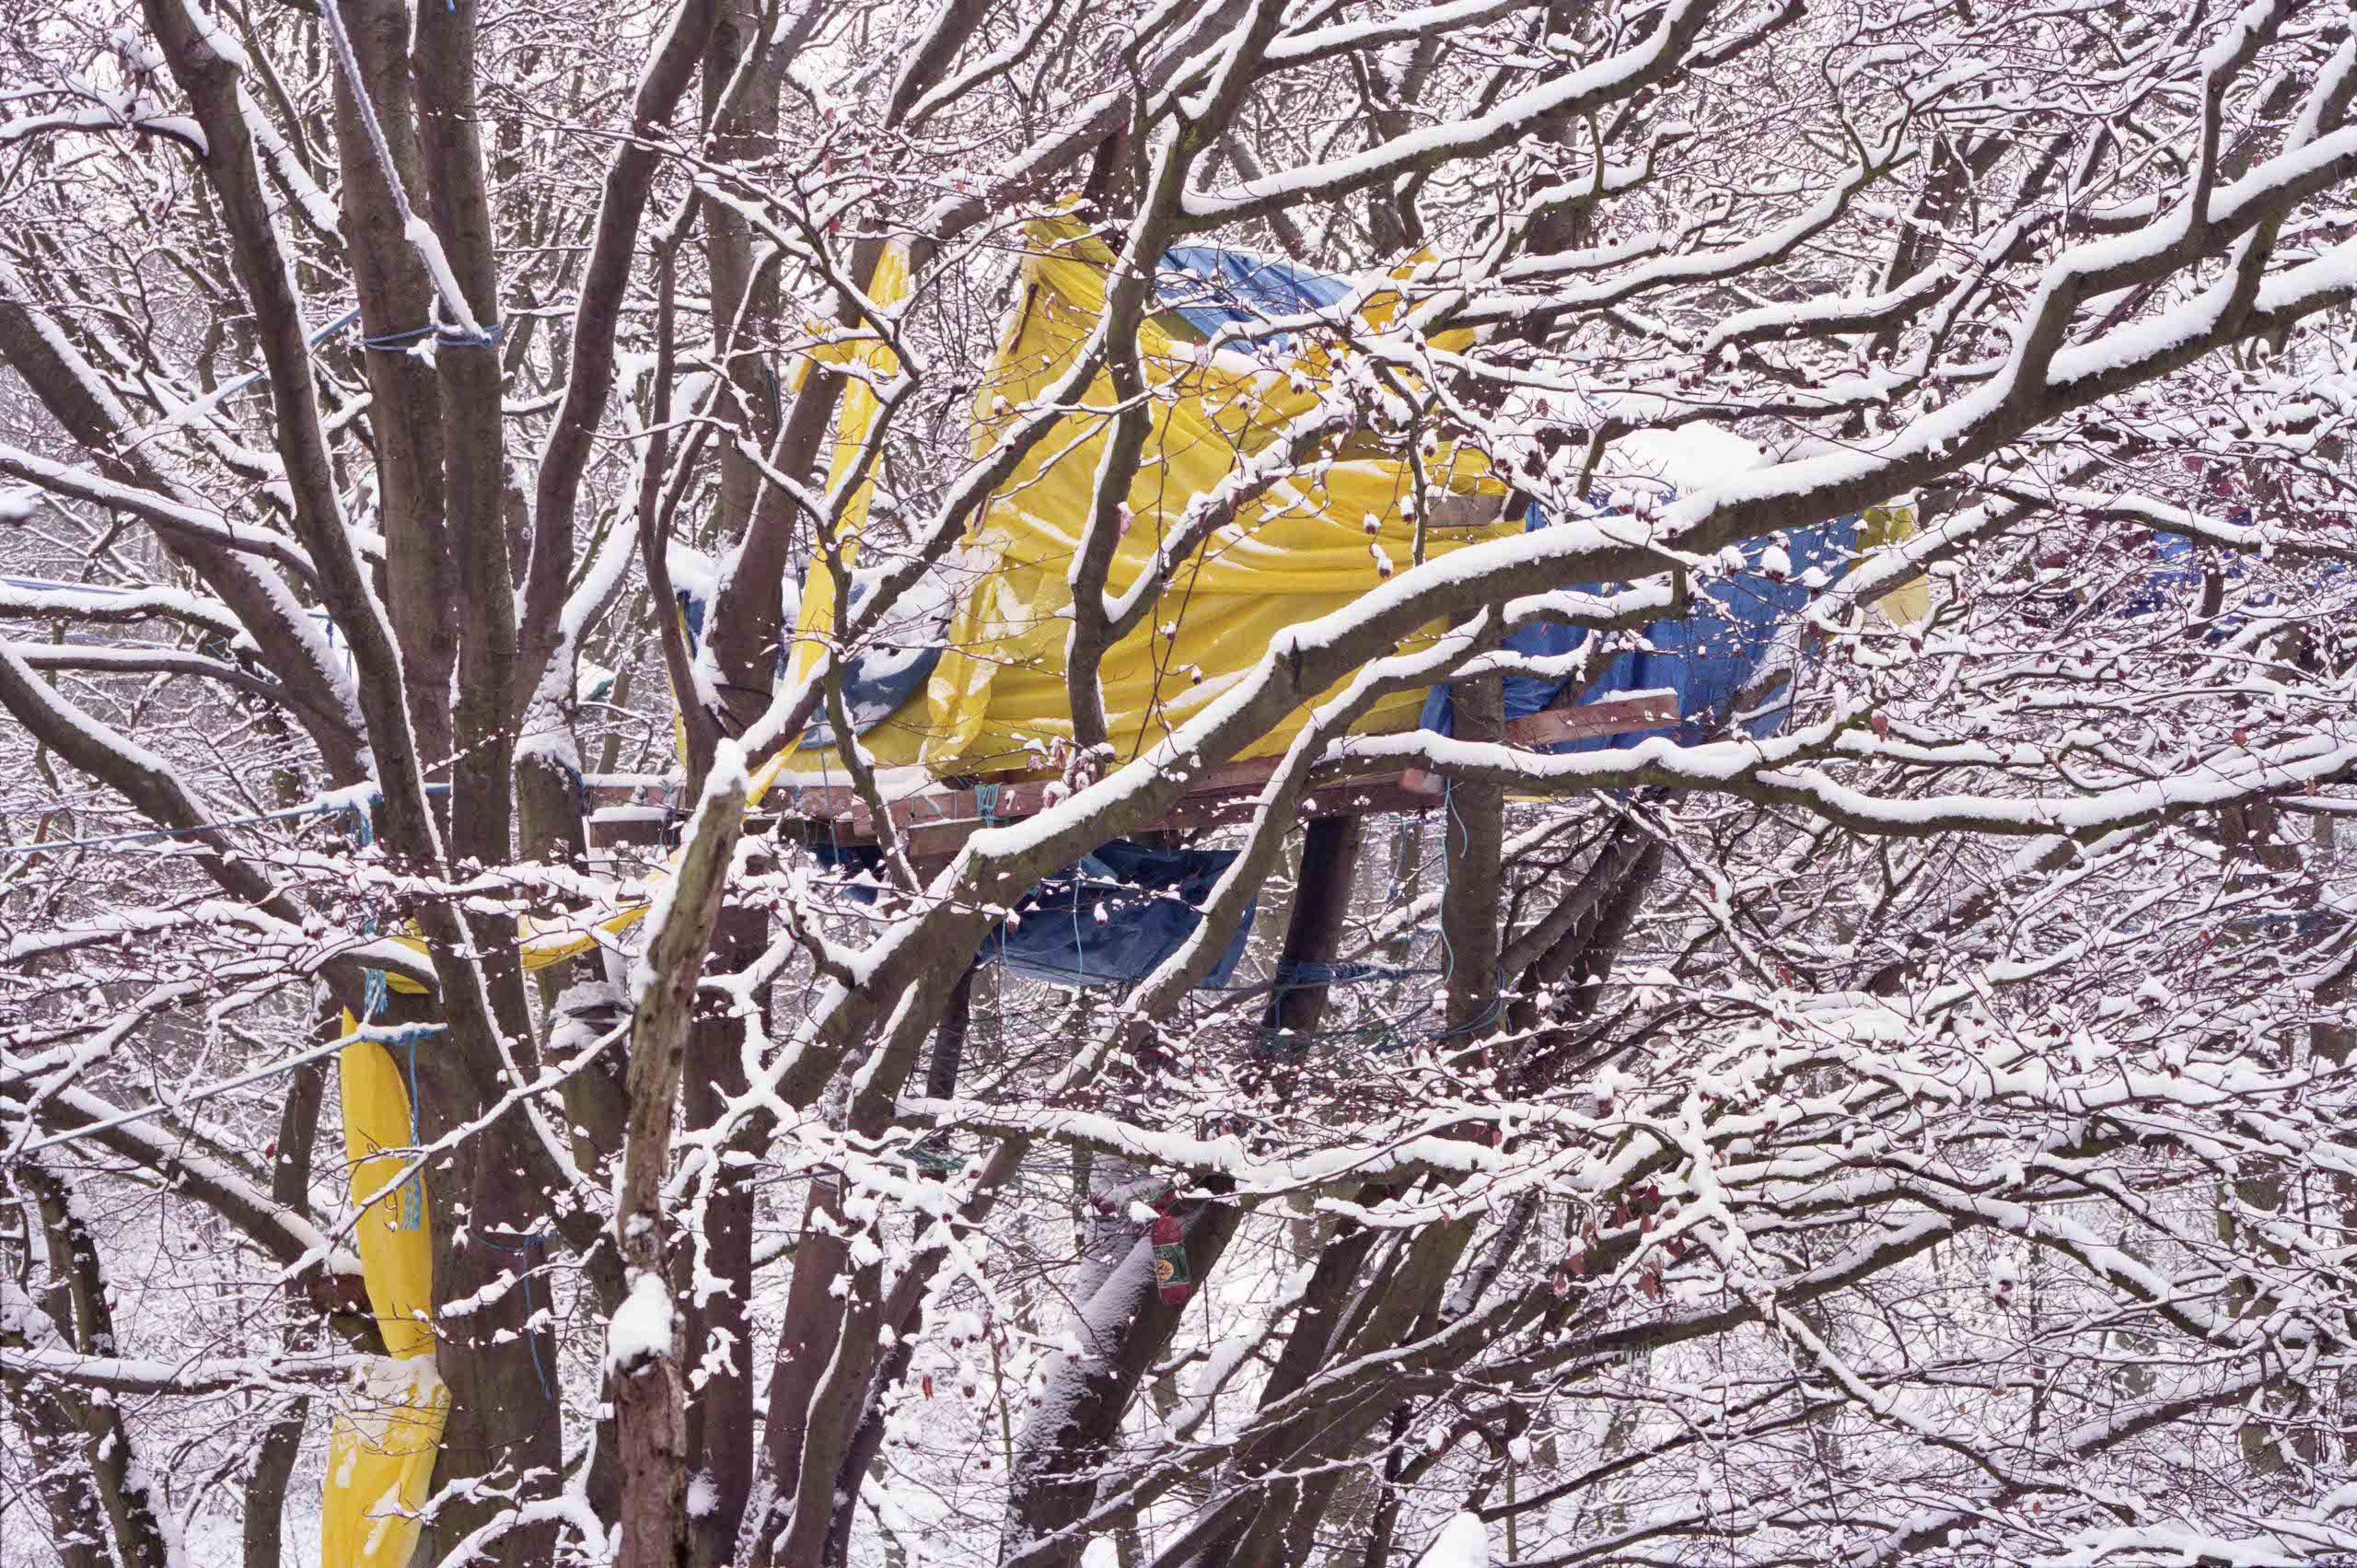 A yellow and blue tent in a tree covered in snow. Historical photograph